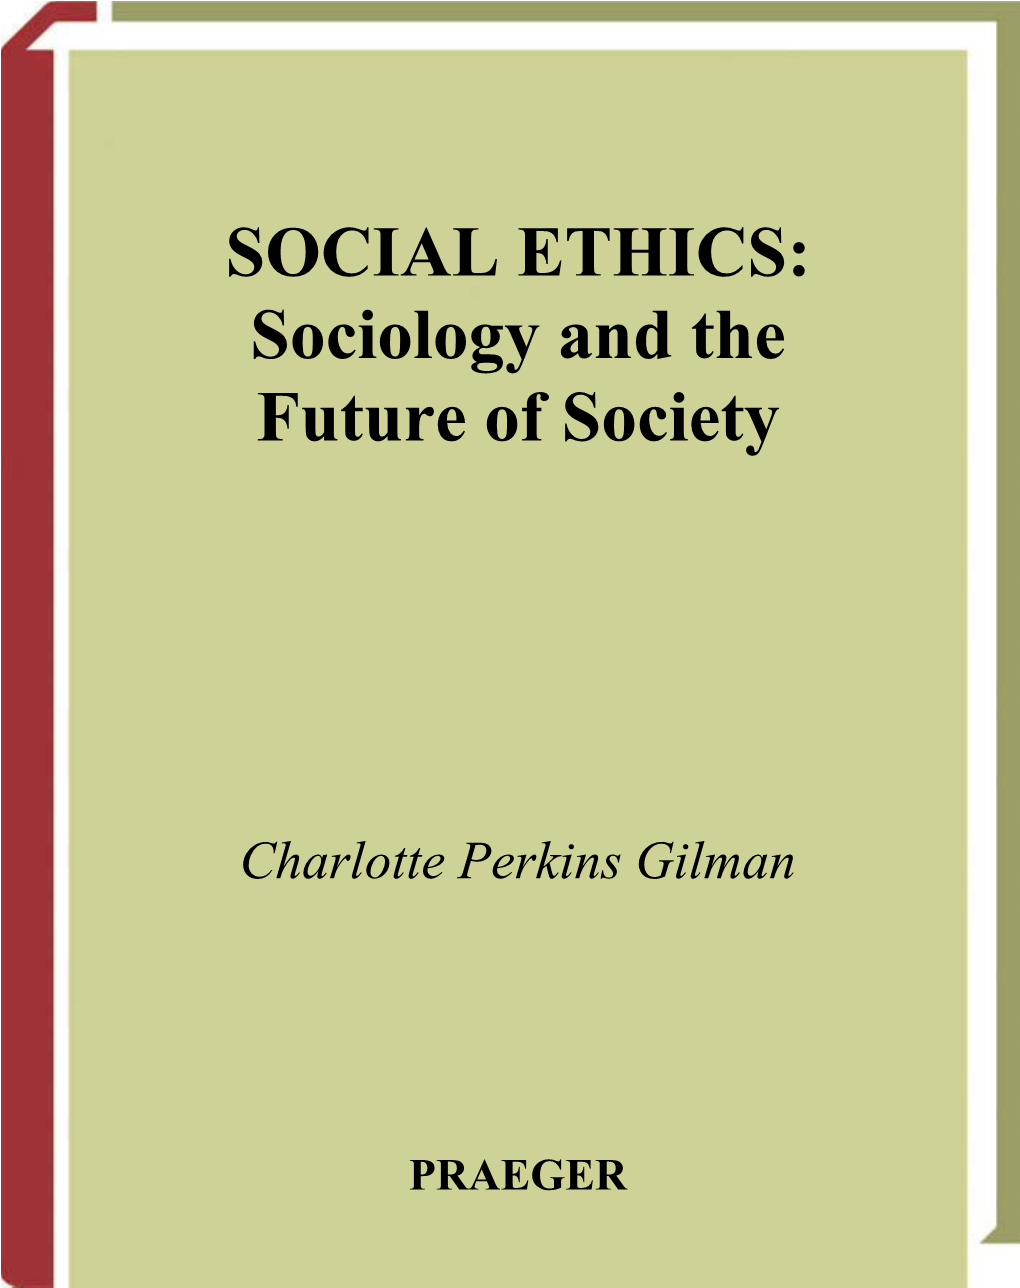 SOCIAL ETHICS: Sociology and the Future of Society